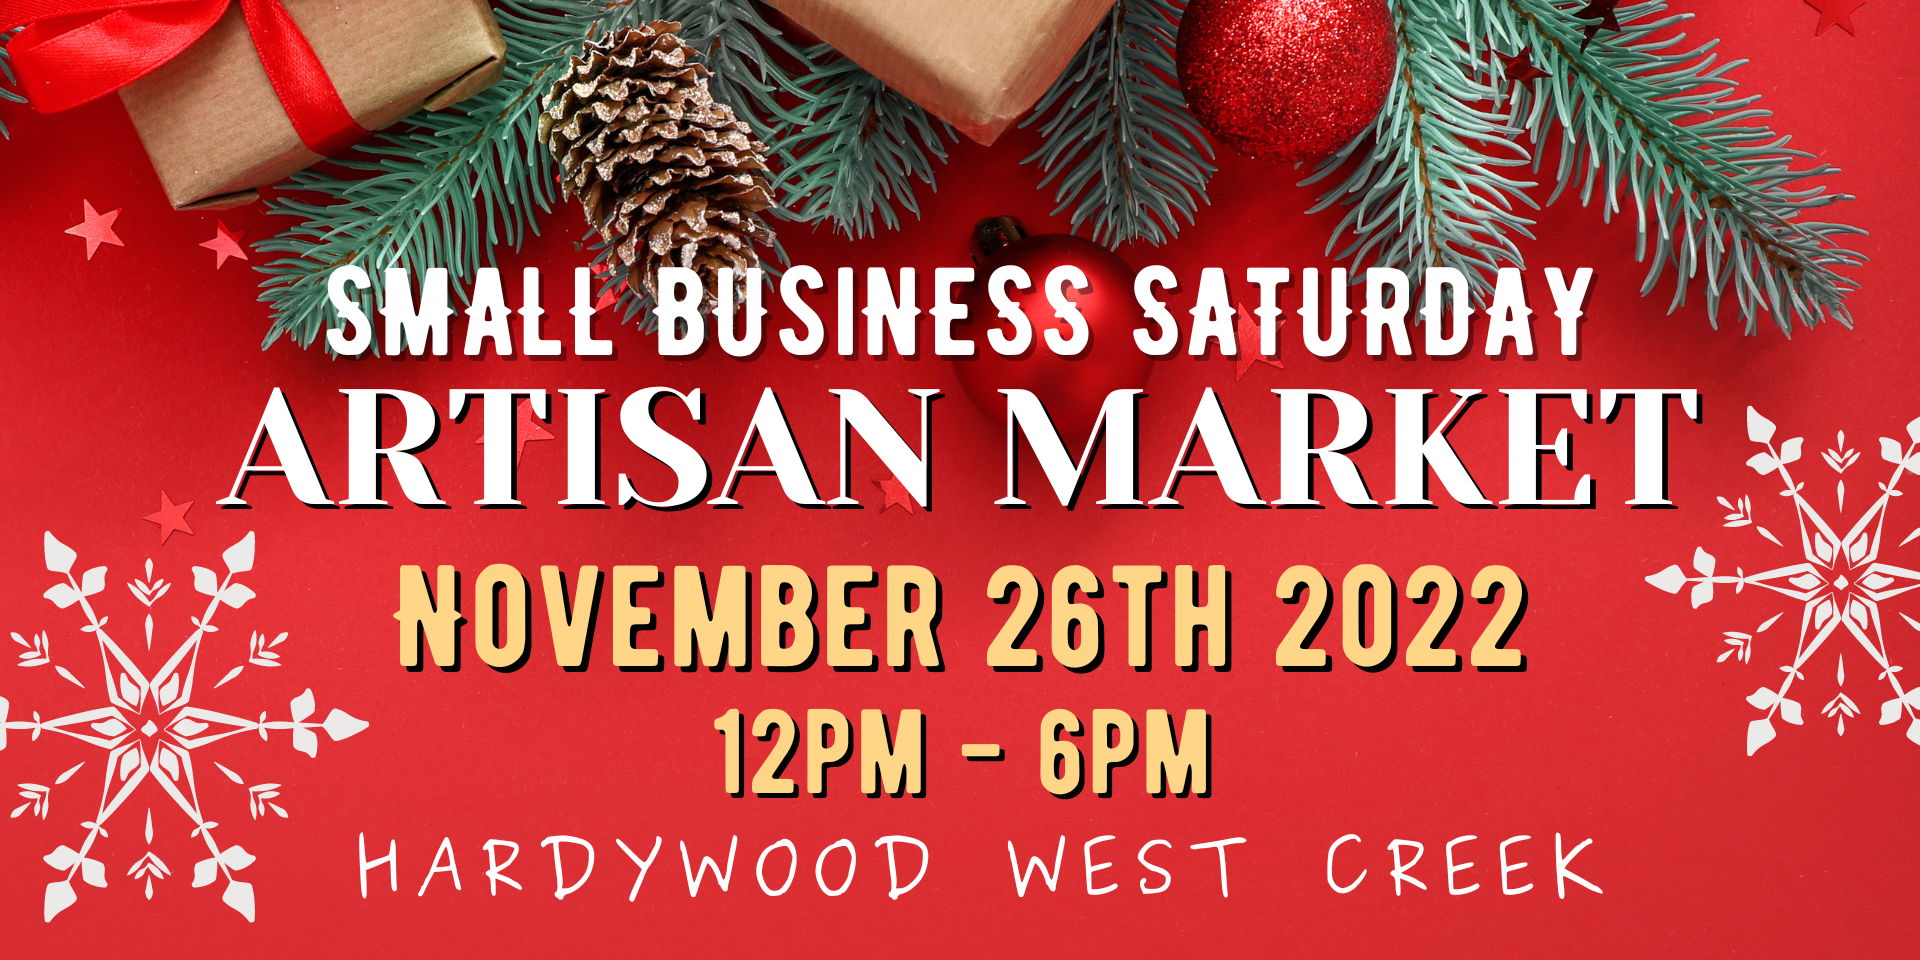 Small Business Saturday Artisan Market promotional image